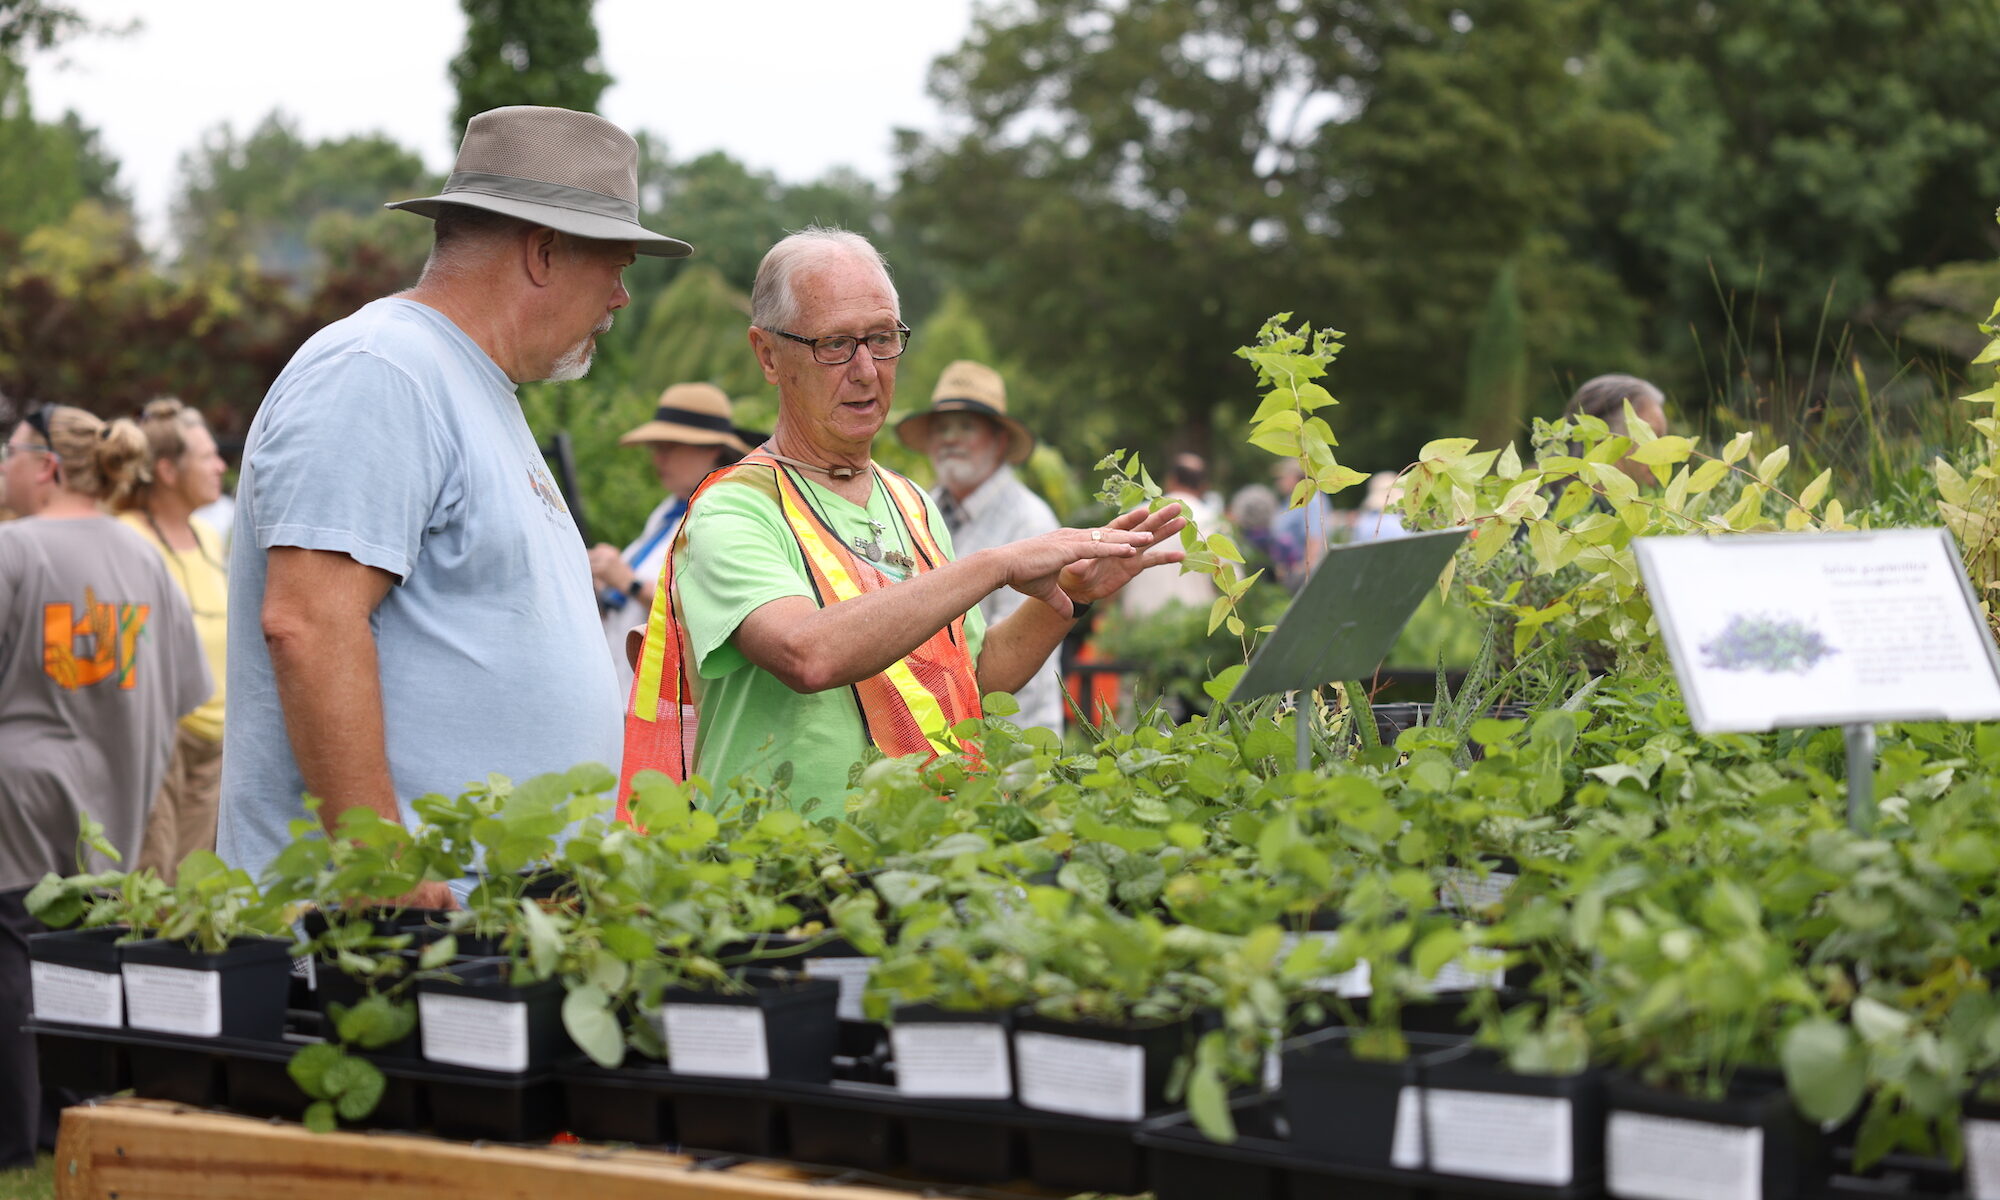 A volunteer in an orange vest gestures to a display of plants while talking with a shopper